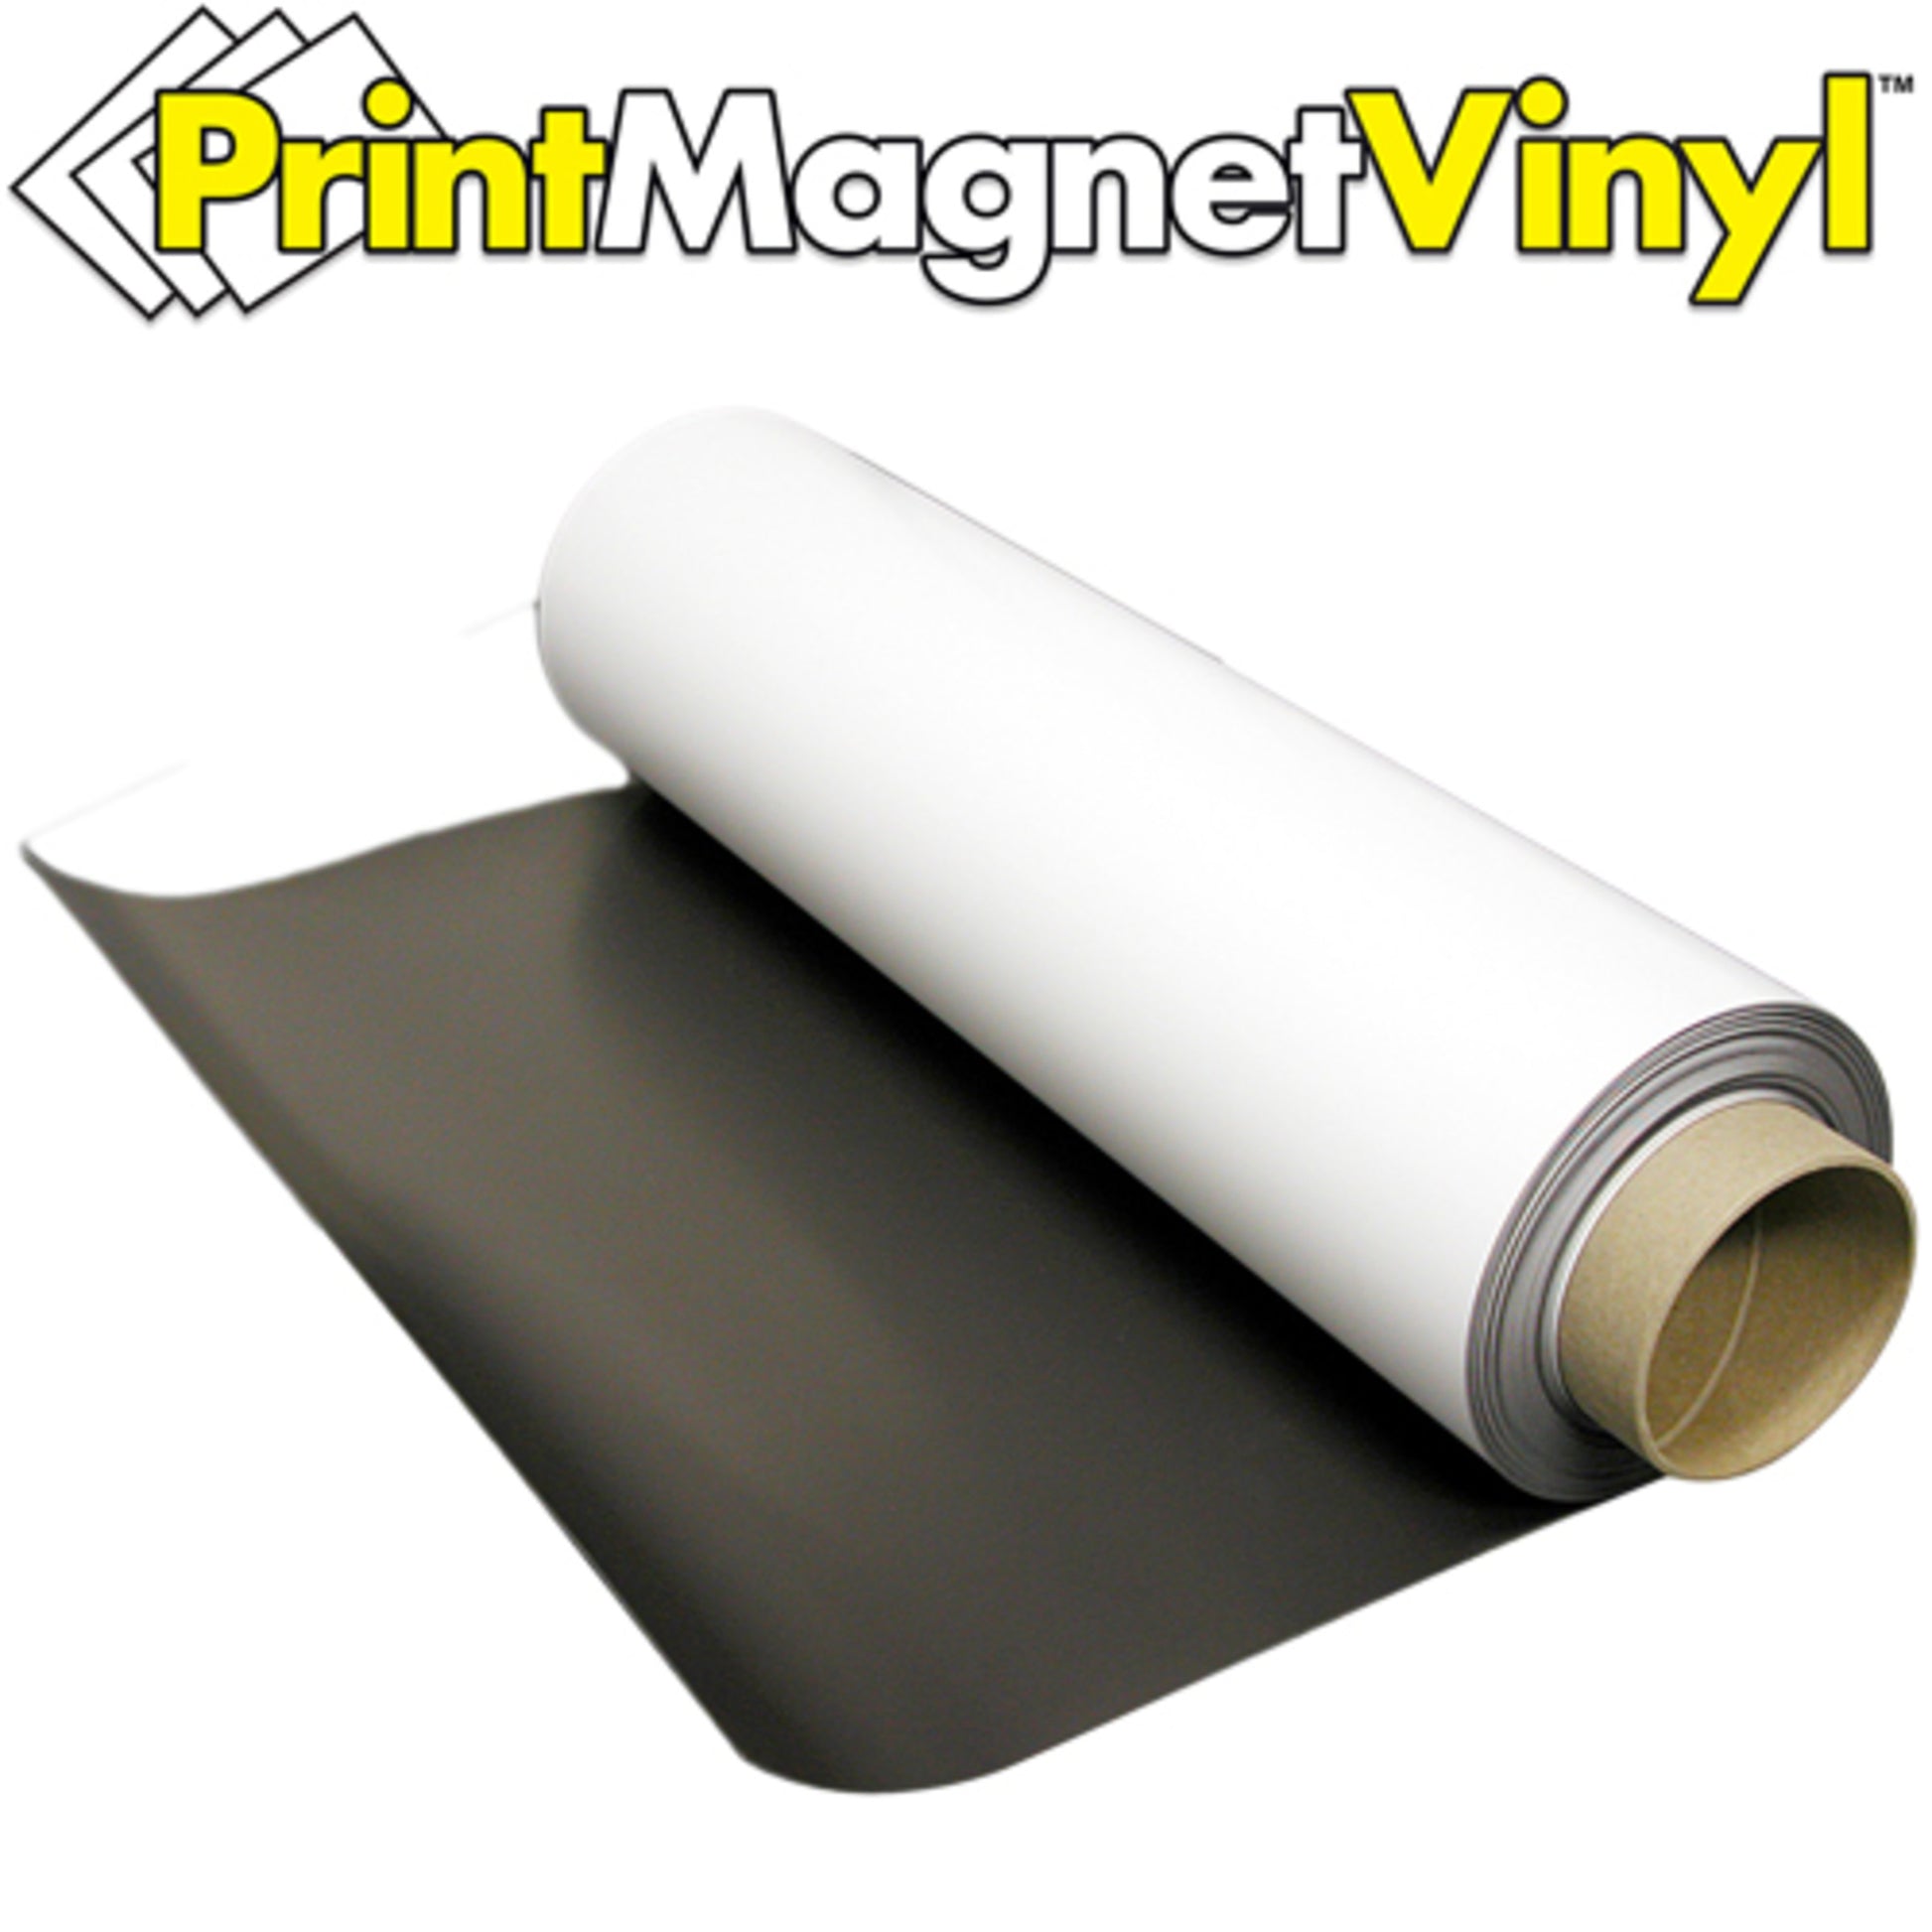 Load image into Gallery viewer, ZG1224GW10F PrintMagnetVinyl™ Flexible Magnetic Sheet - In Use